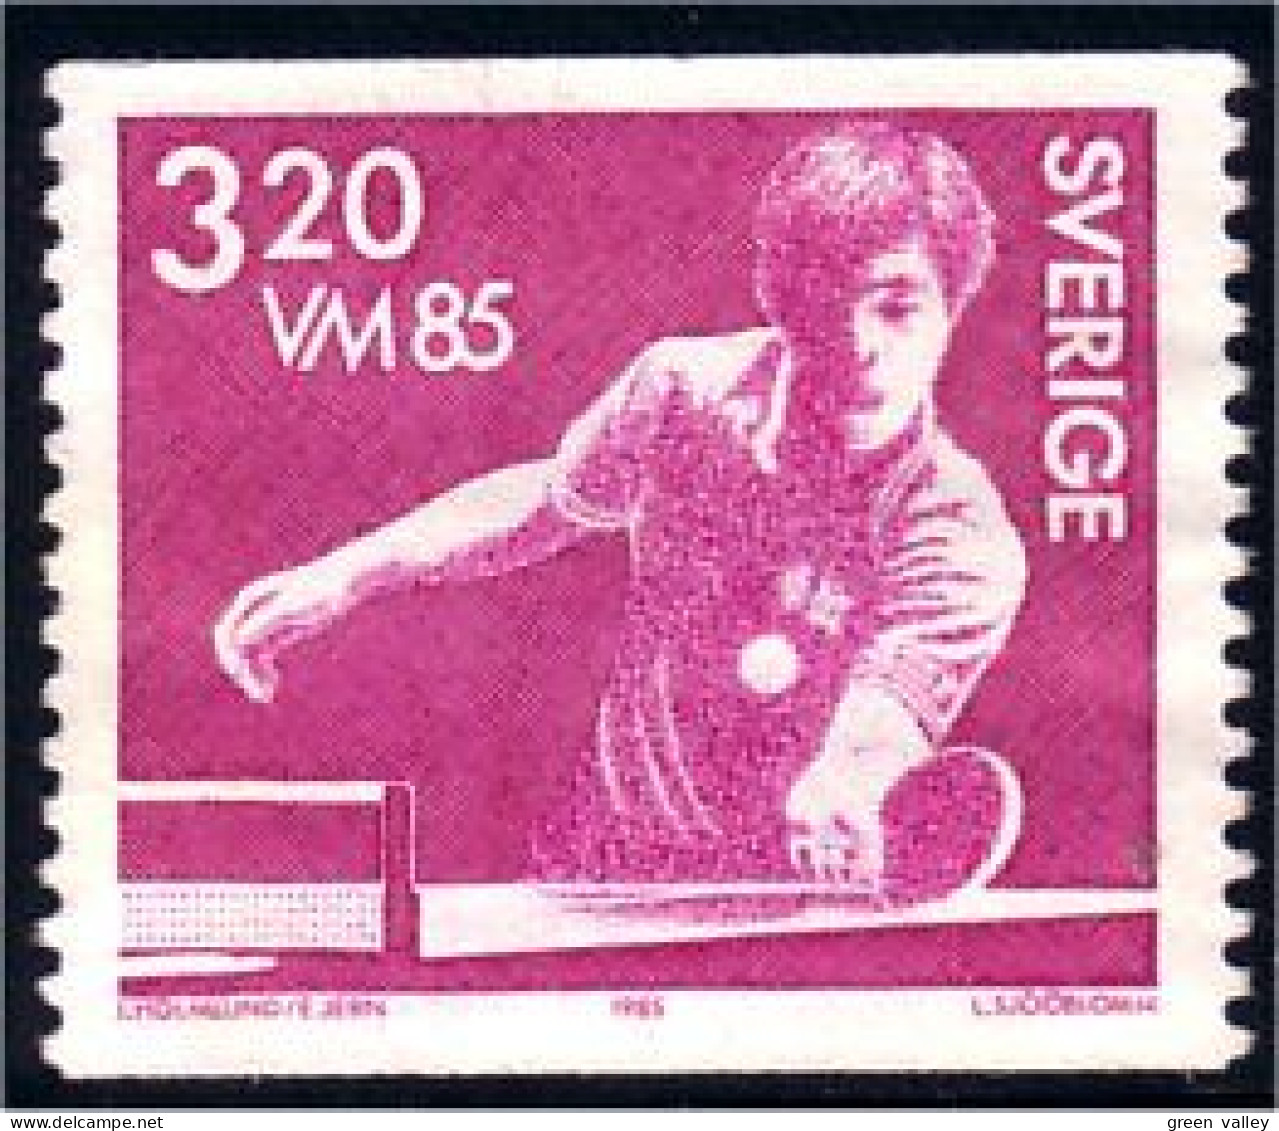 840 Sweden Table Tennis Ping Pong No Gum (SWE-84) - Table Tennis